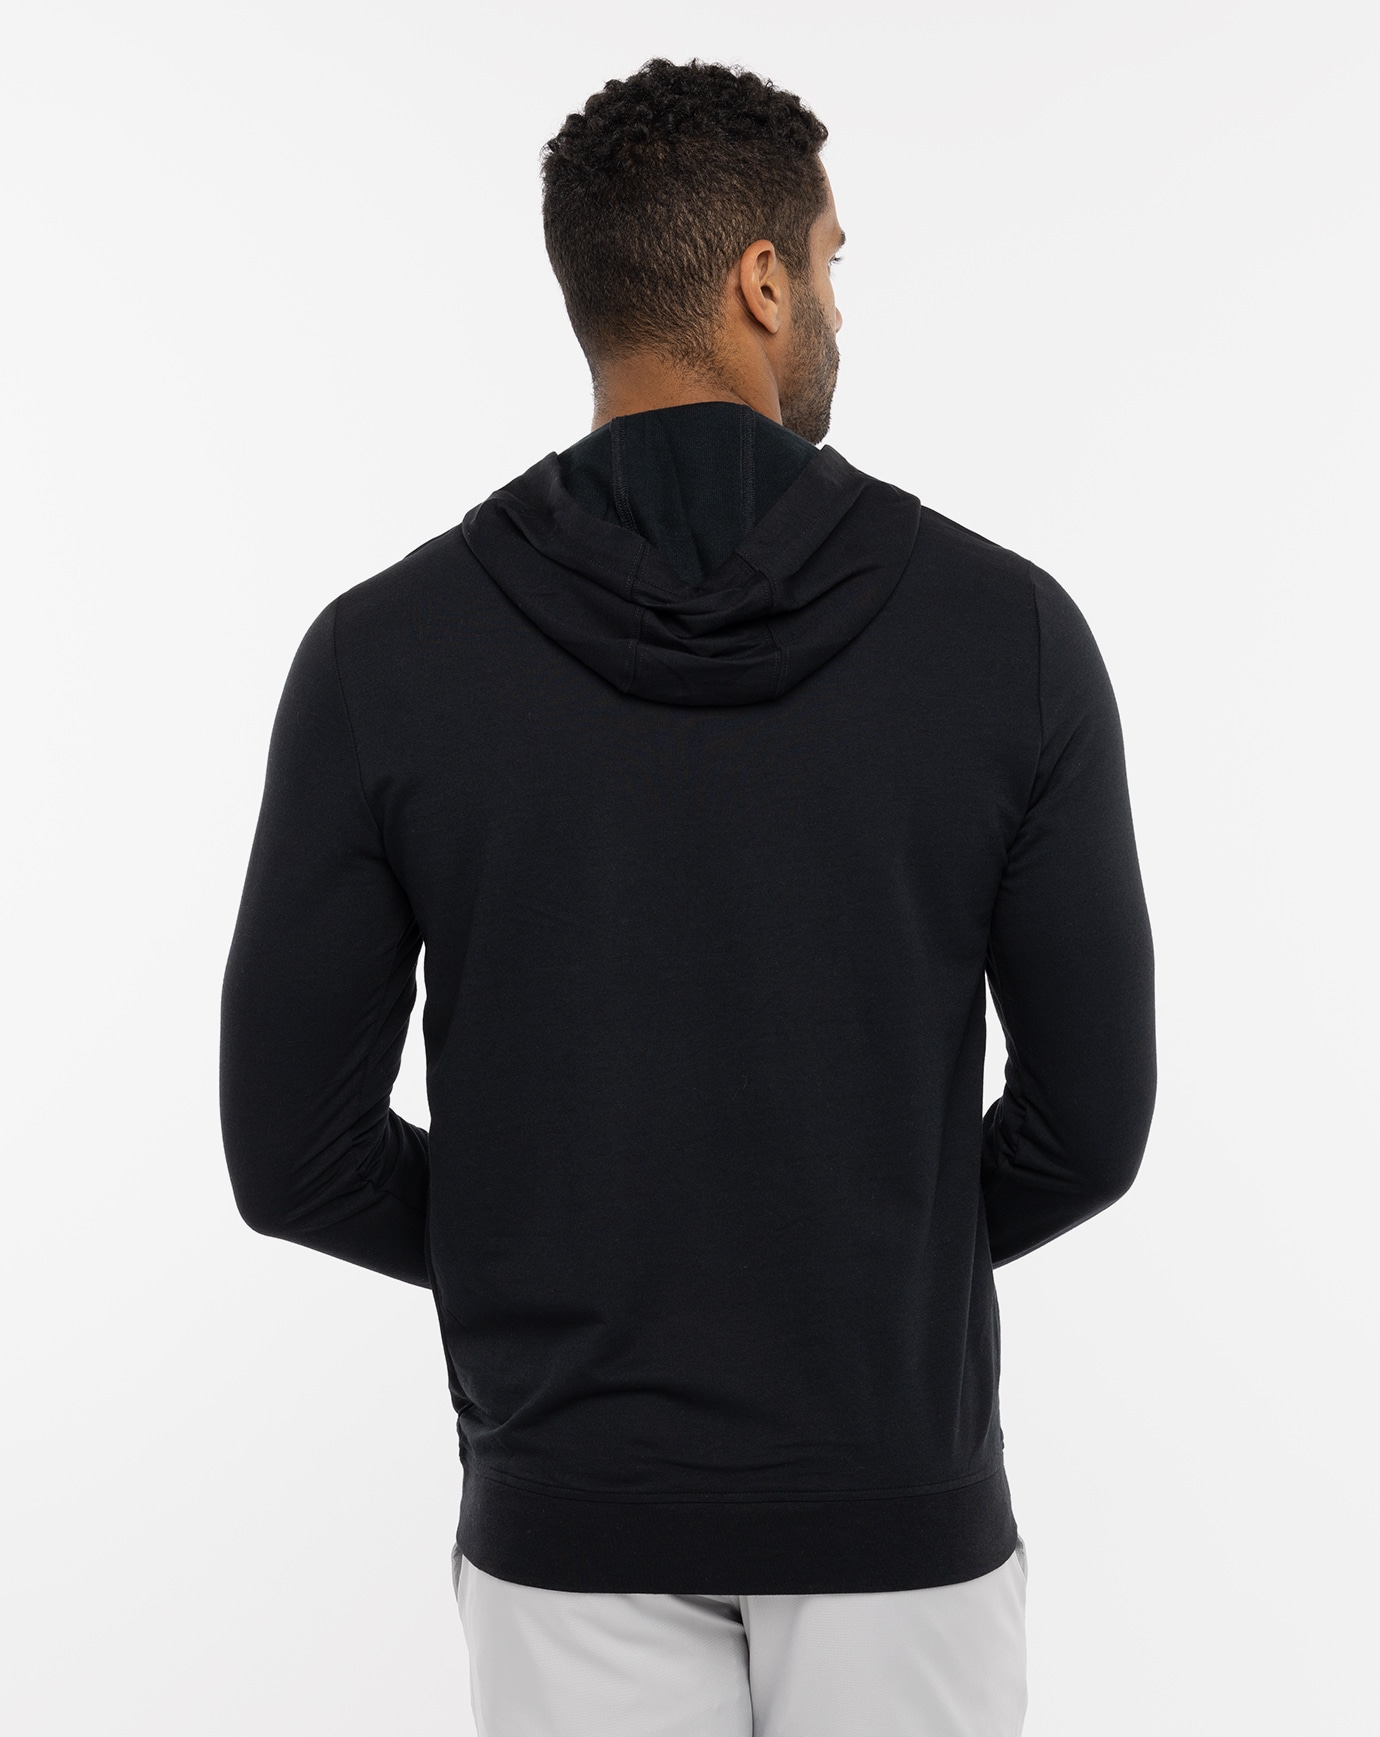 STORMY POINT HOODIE Image Thumbnail 3